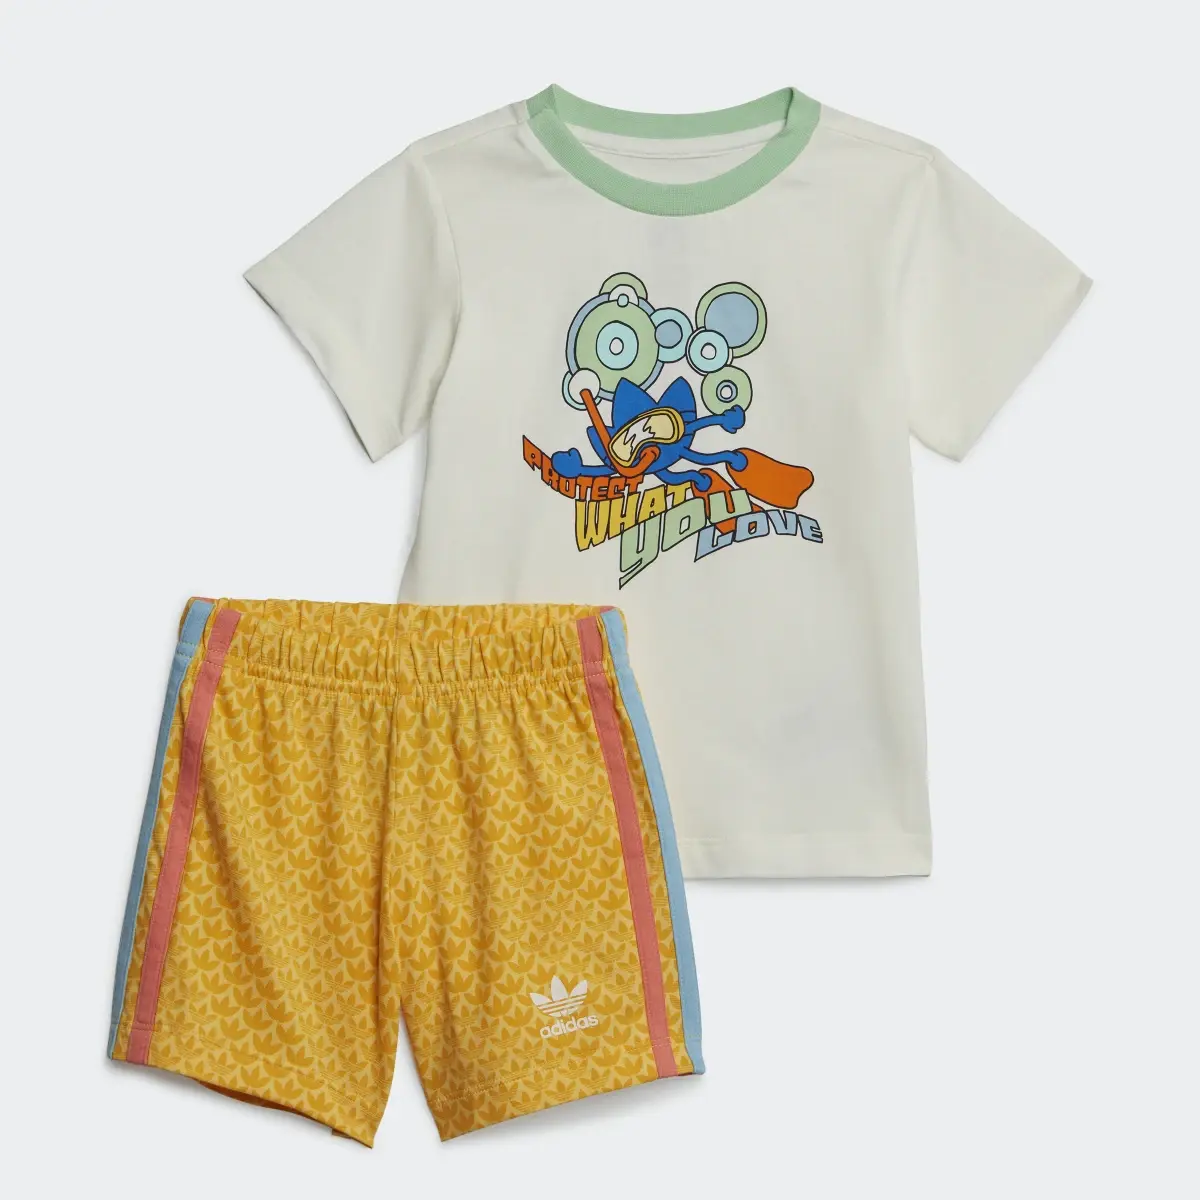 Adidas Completo Graphic Print Shorts and Tee. 1